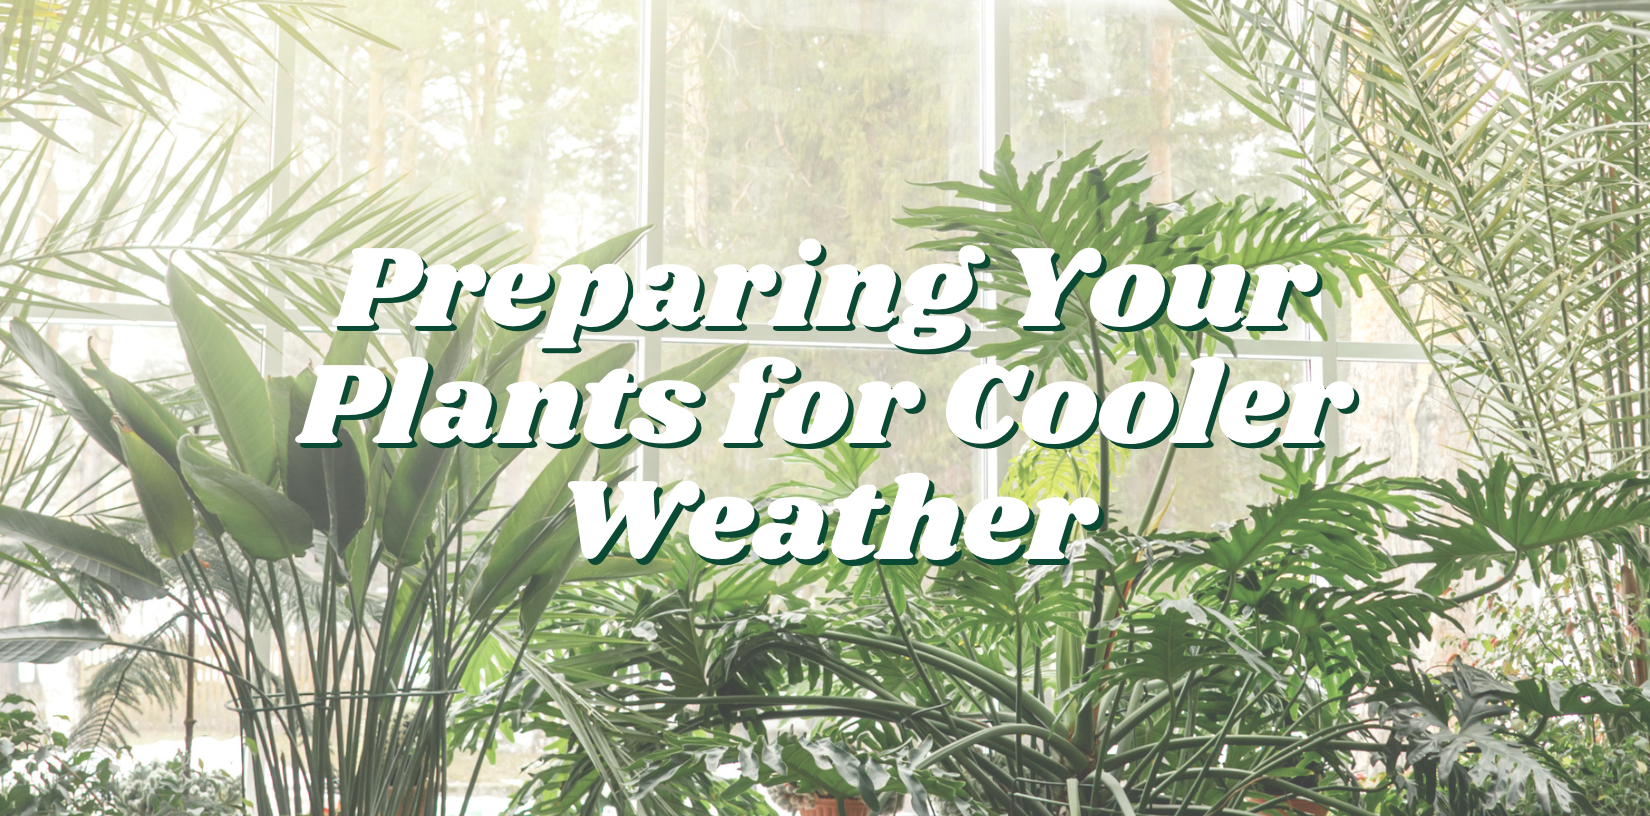 Preparing Your Plants for Cooler Weather